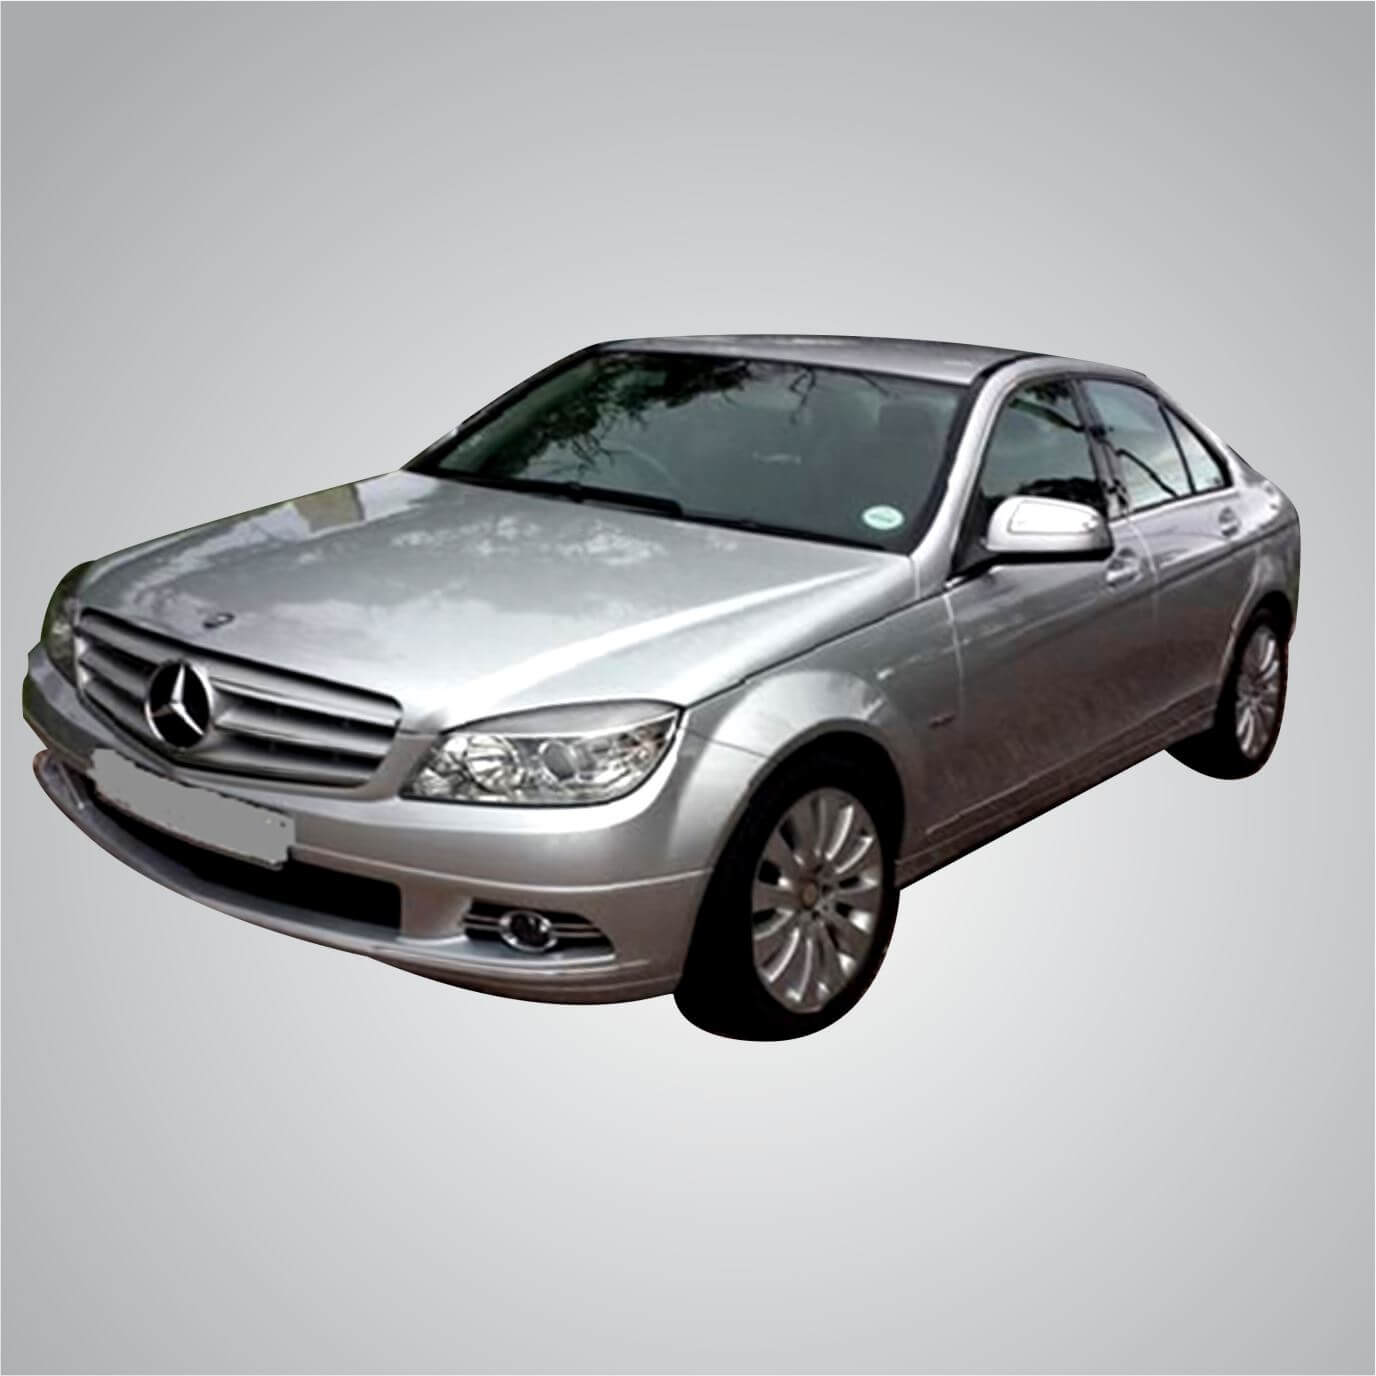 Hire a 3 seater Car with driver (Mercedes C-class 2014) from Cape Town Coach Hire in Cape Town 